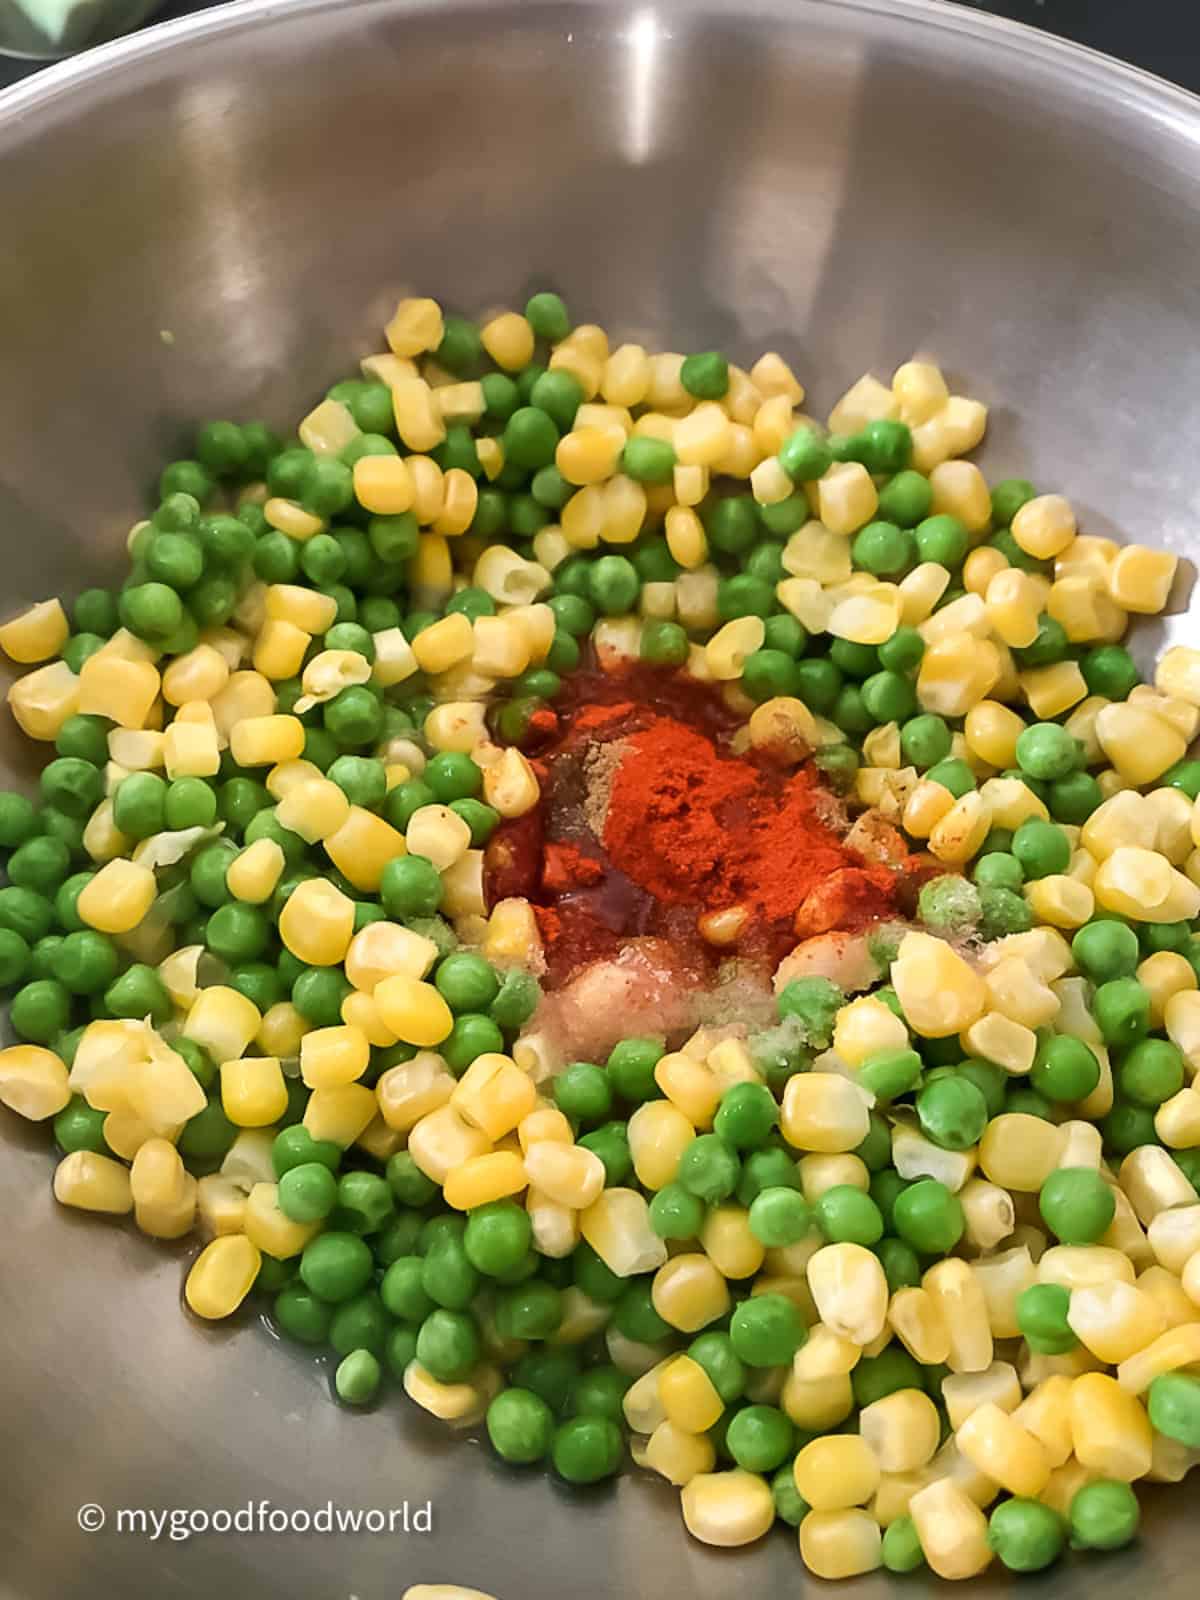 Spices and flavorings added to the cooking peas and corn salad.